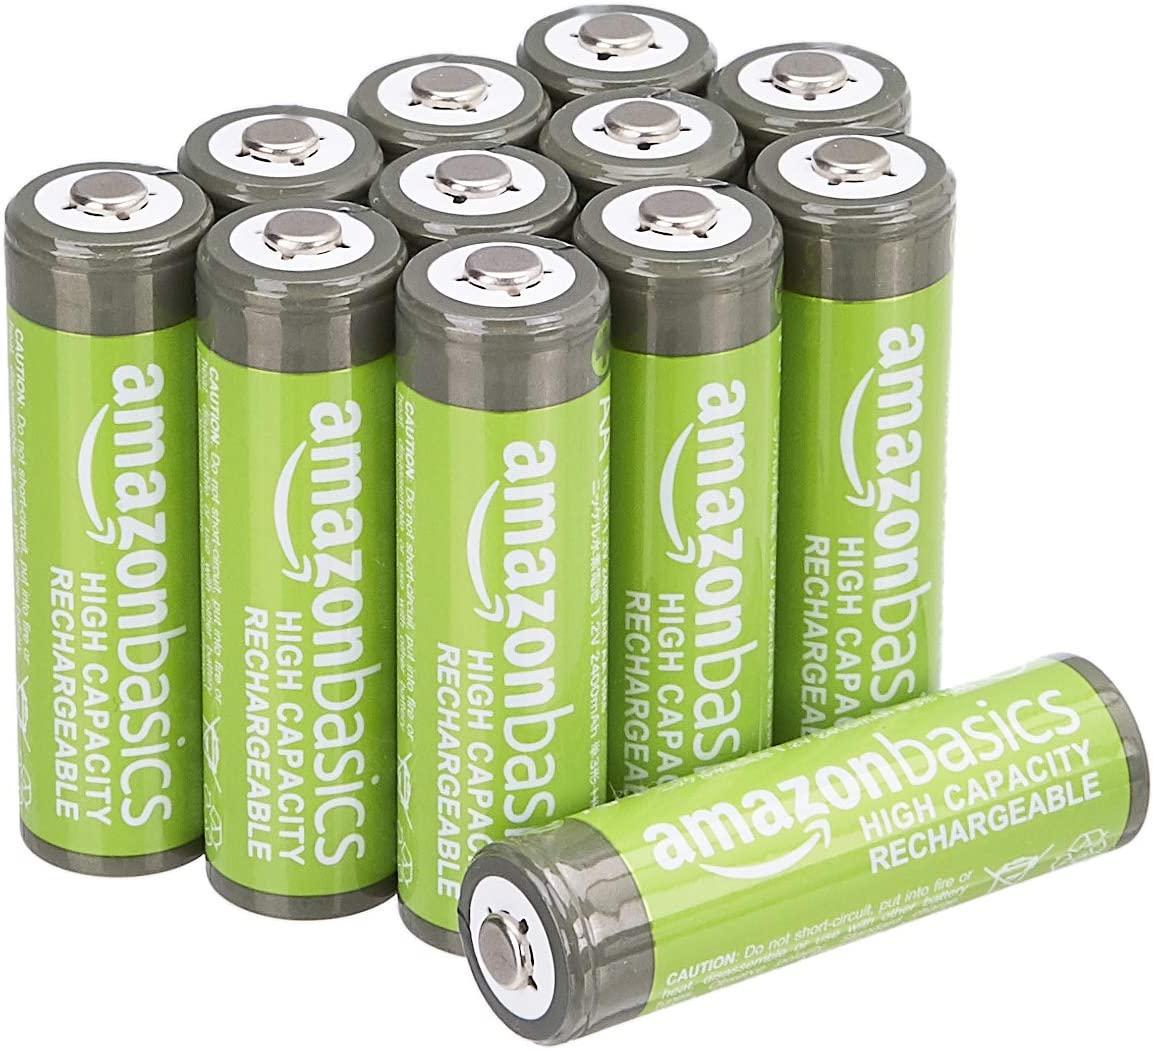 Amazon Basics AA 2400 mAh Rechargeable Batteries 12 Pack for $15.58 Shipped